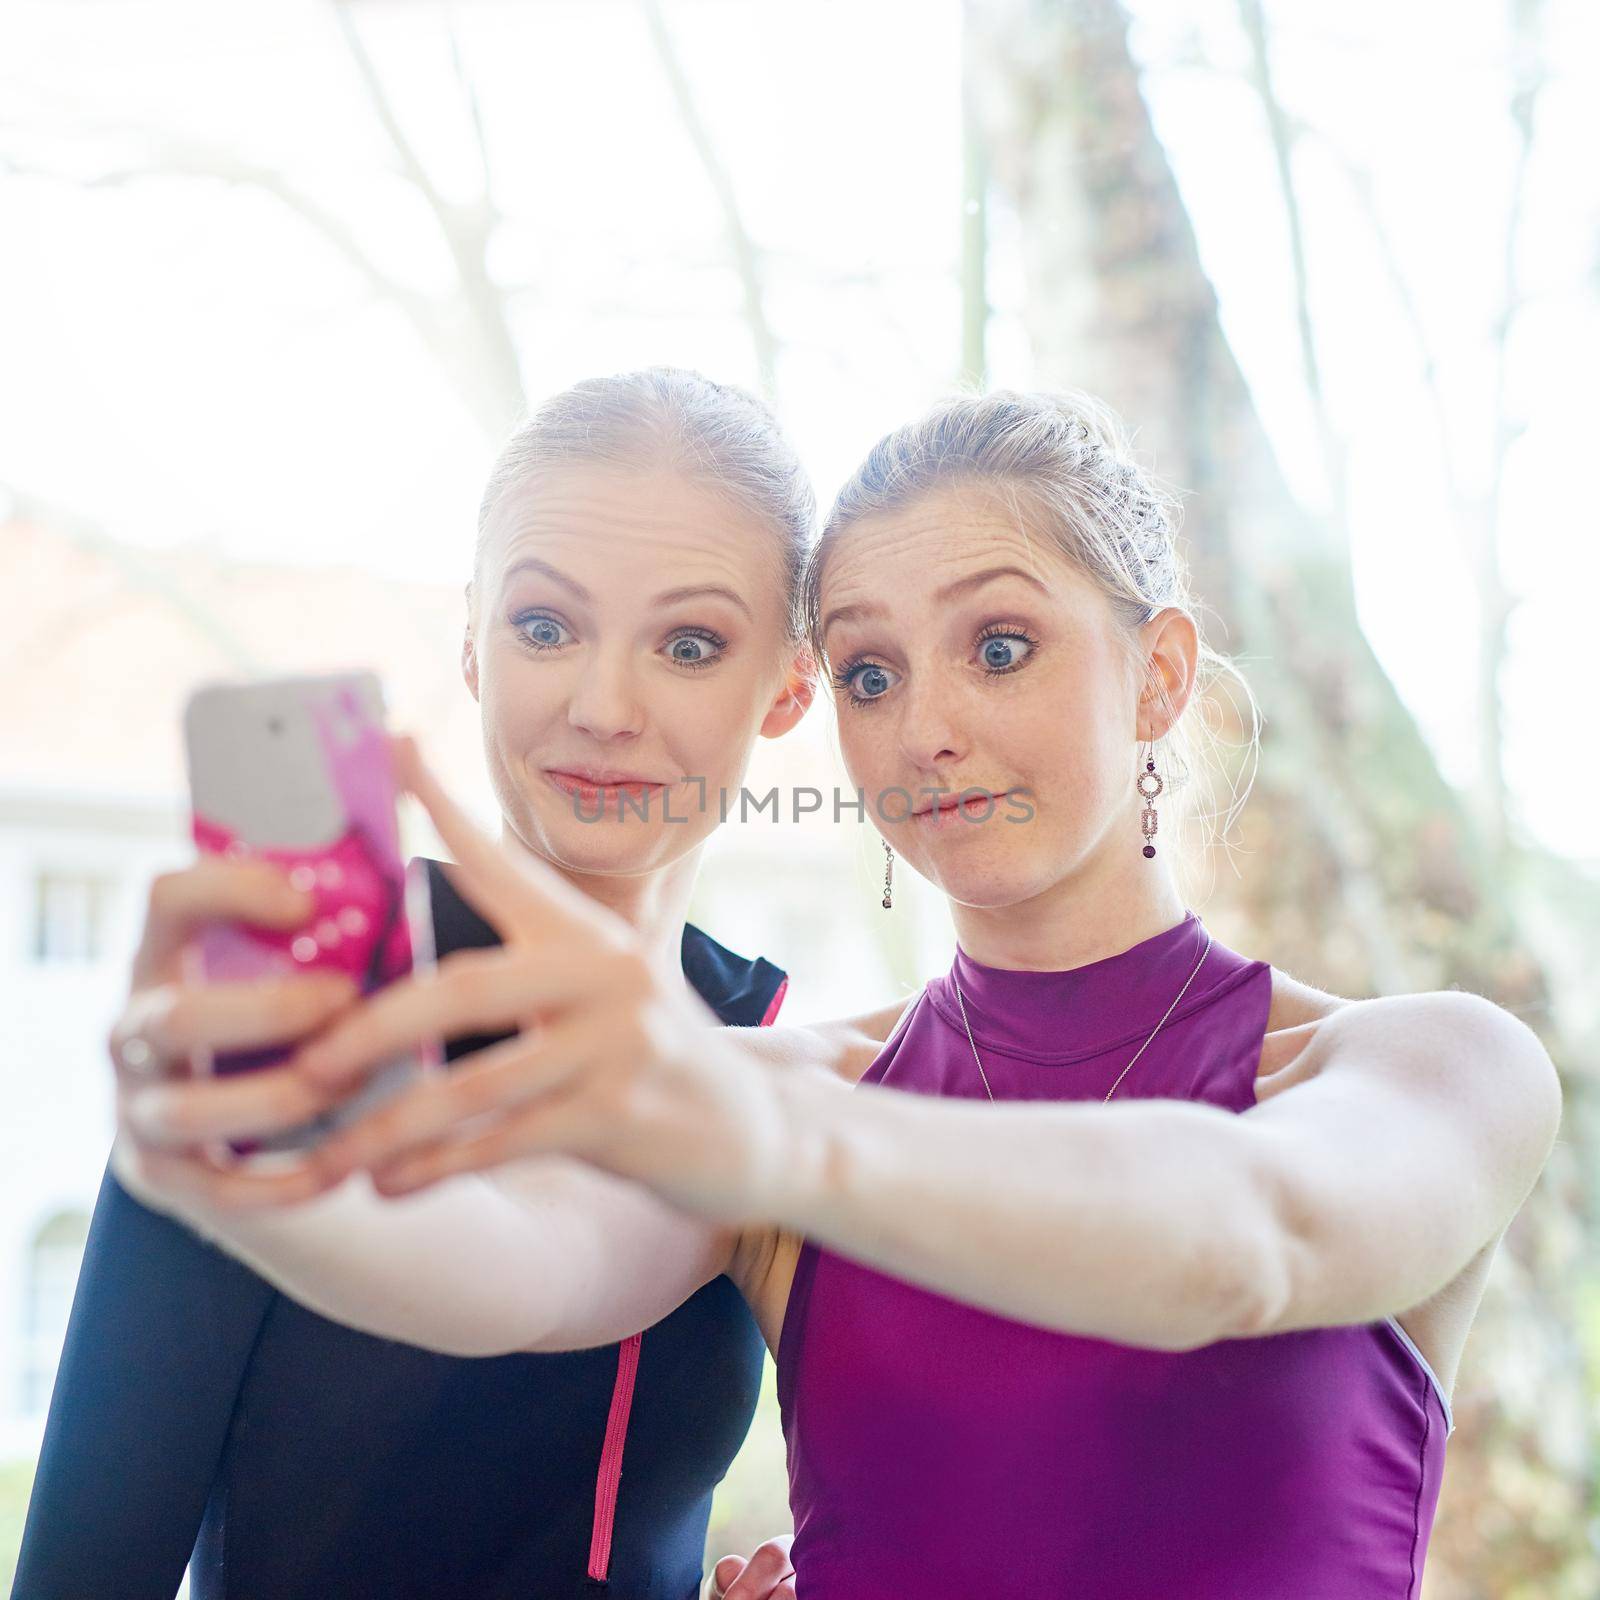 Get fit and have fun while doing it. two sporty young women taking a selfie after their workout